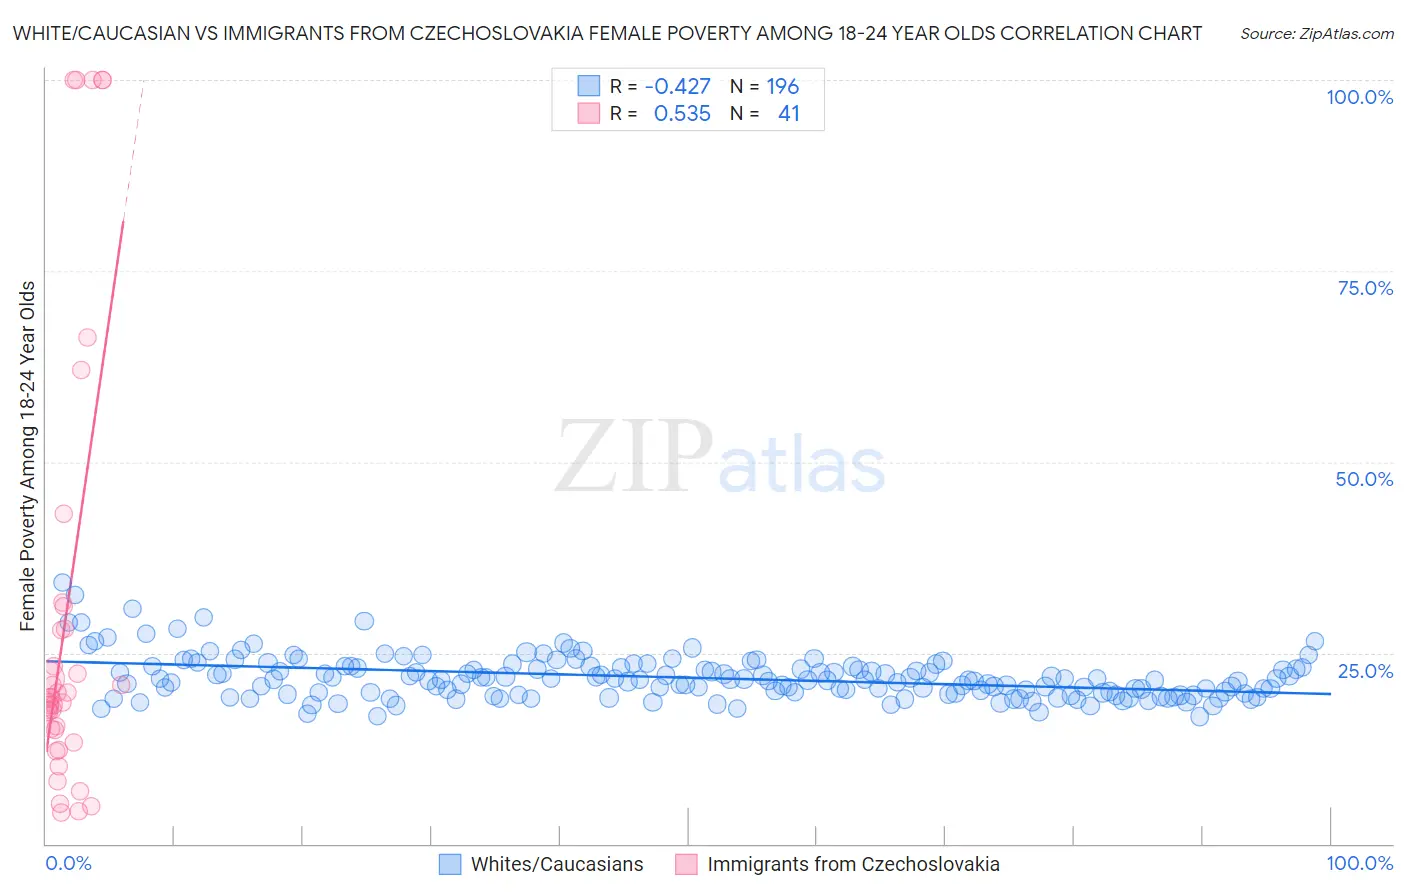 White/Caucasian vs Immigrants from Czechoslovakia Female Poverty Among 18-24 Year Olds